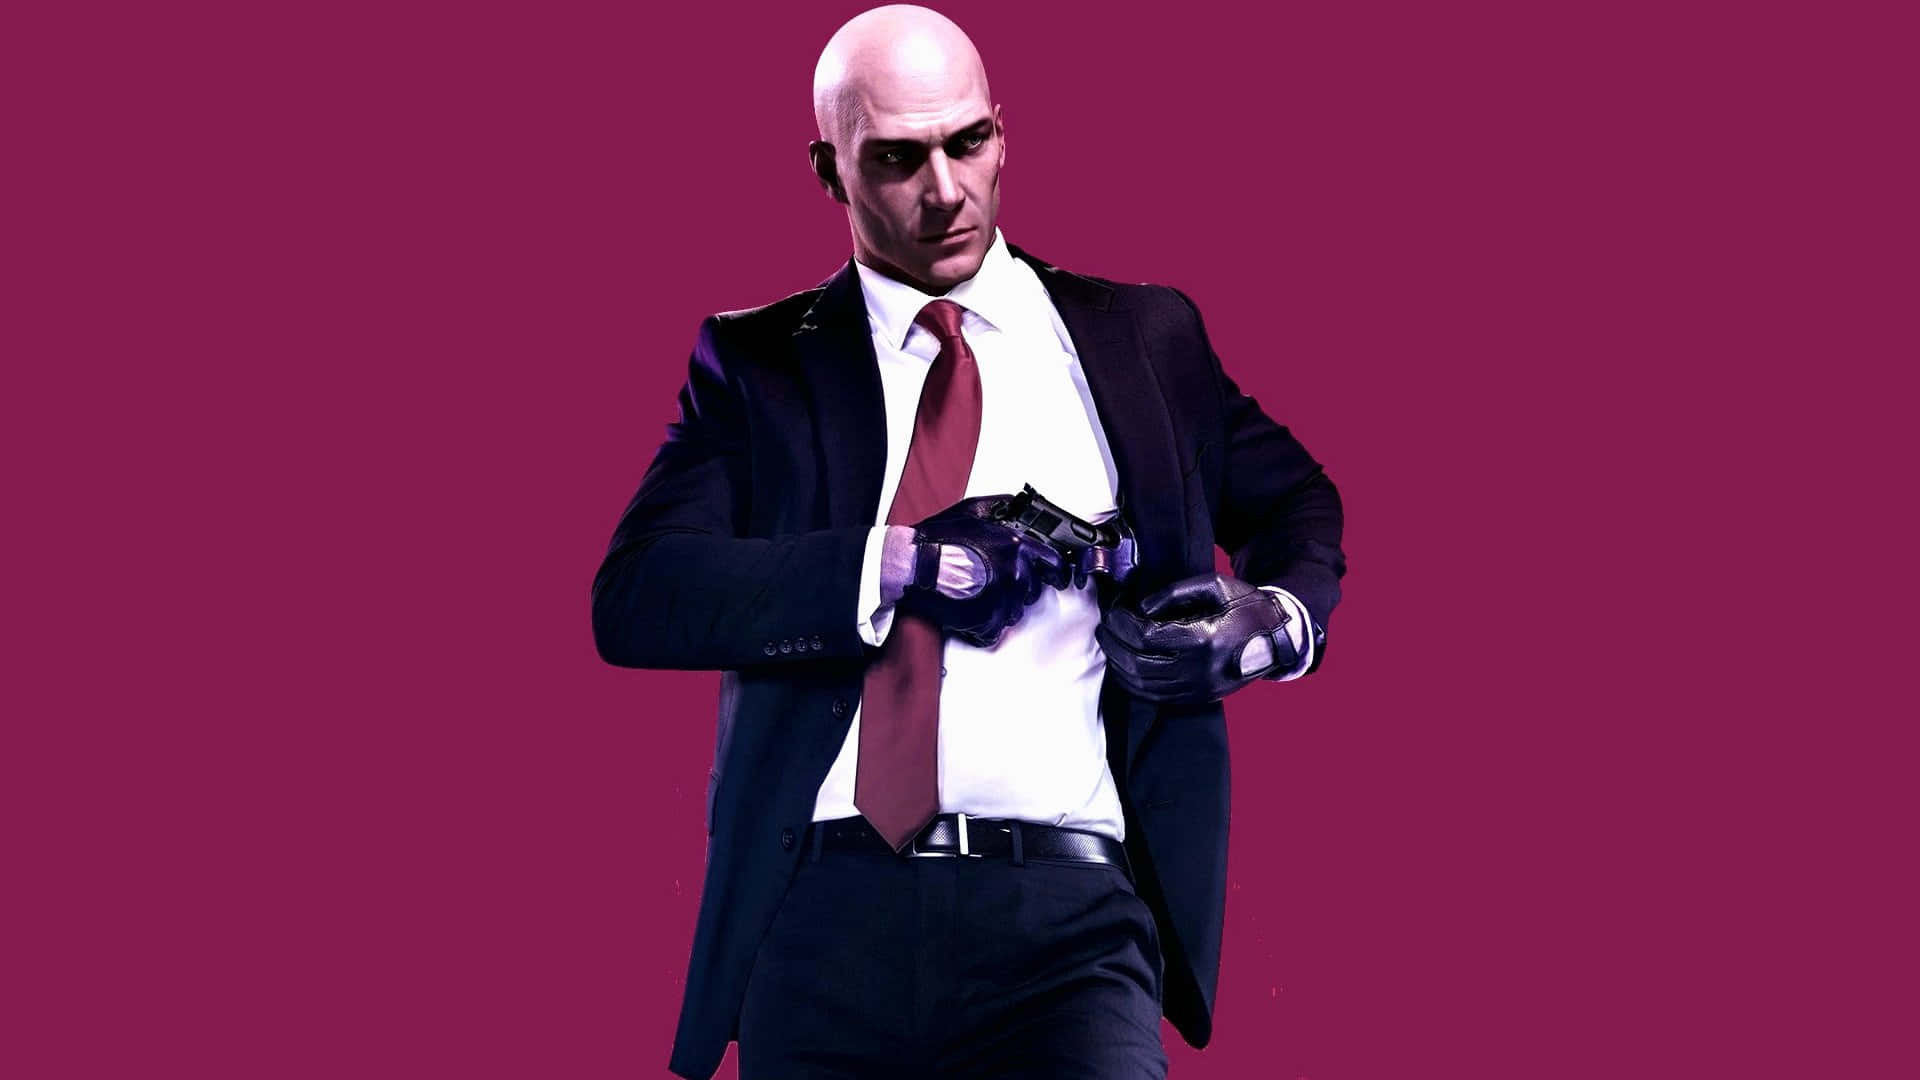 A Man In A Suit And Tie Holding A Gun